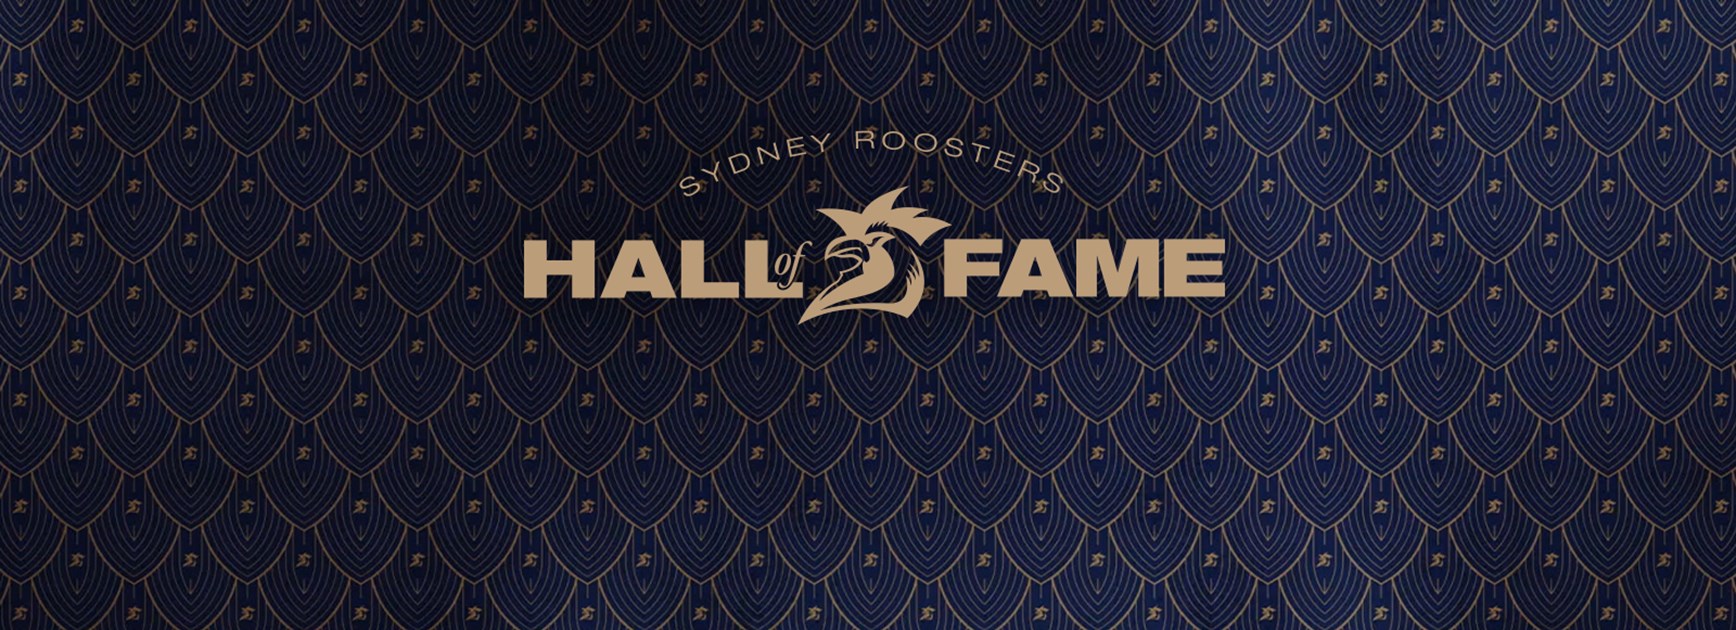 Hall of Fame Inductees Announced